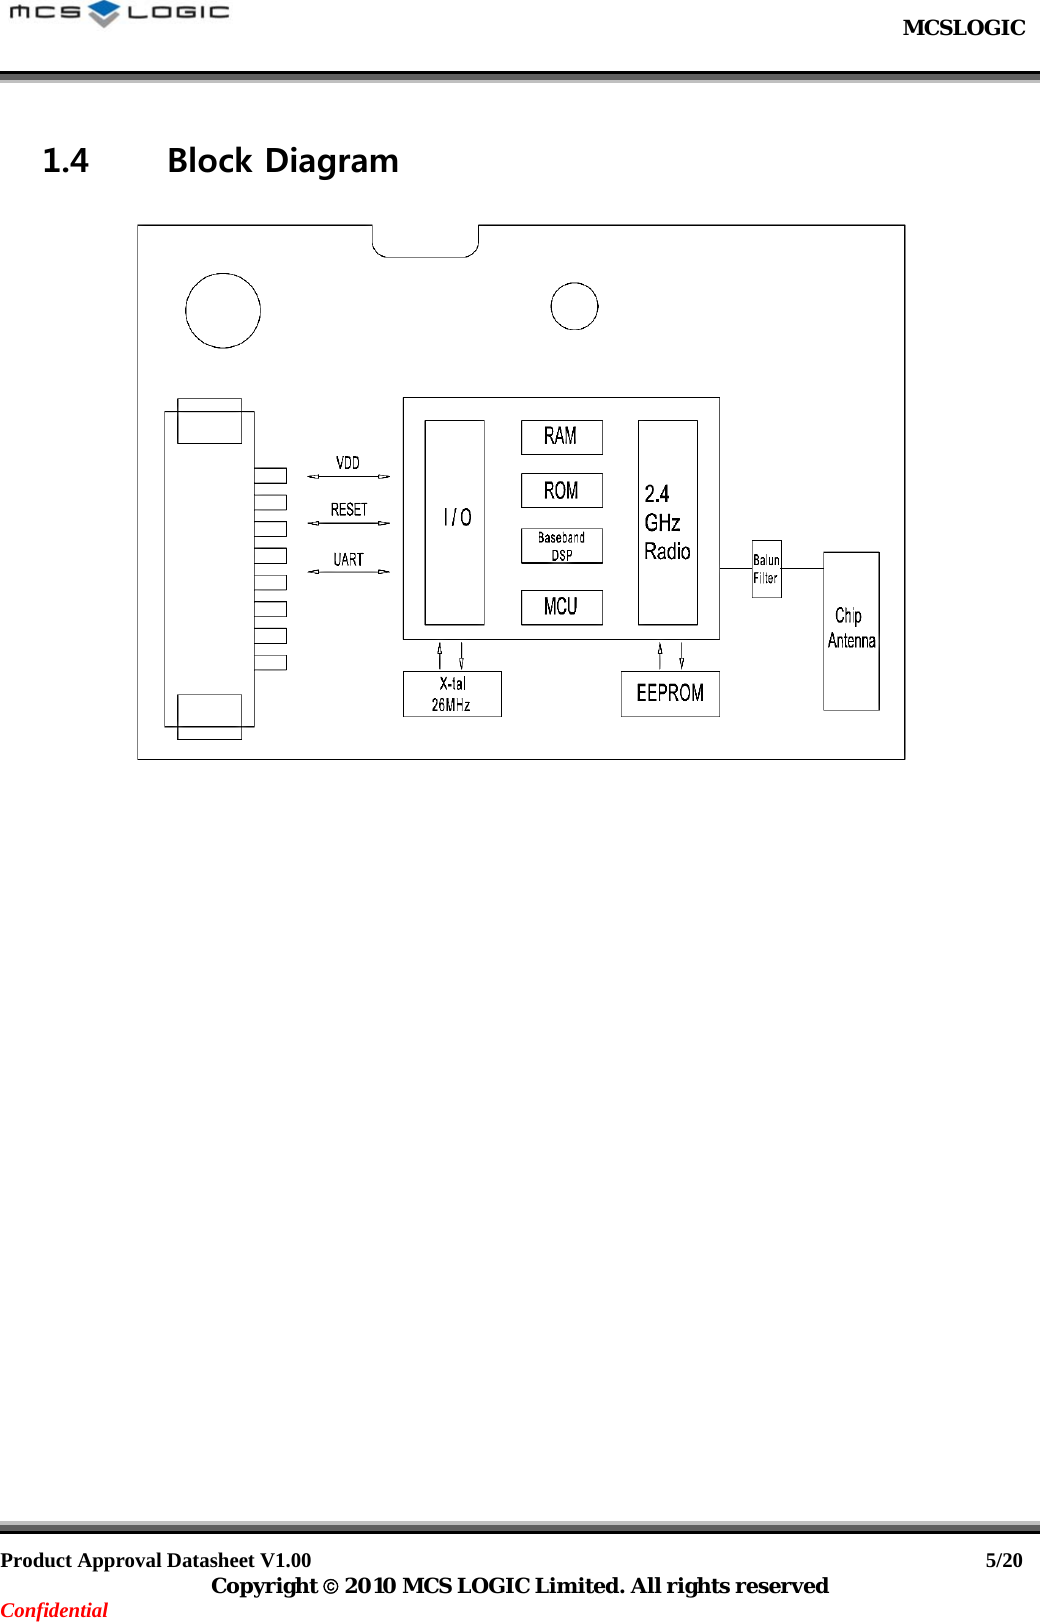                                                           MCSLOGIC                                                                                     Product Approval Datasheet V1.00                                                                  5/20 Copyright © 2010 MCS LOGIC Limited. All rights reserved Confidential 1.4 Block Diagram   